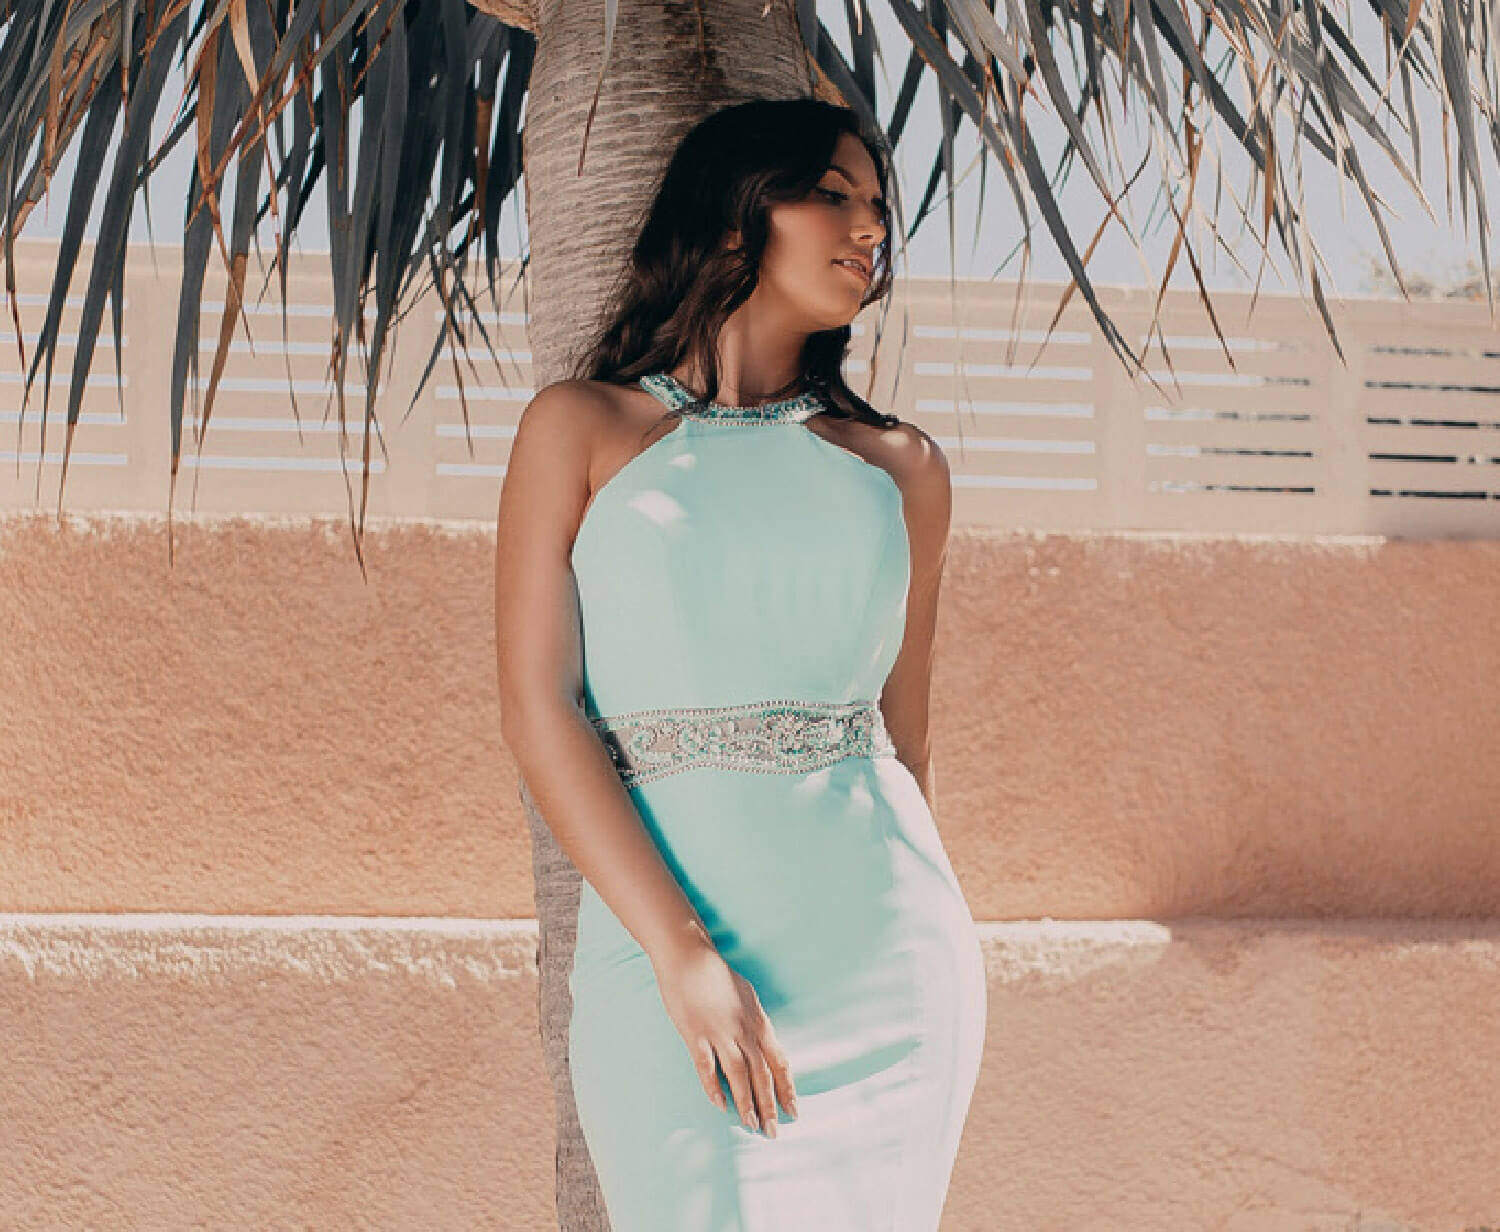 Model wrearing a light blue special occasion dress